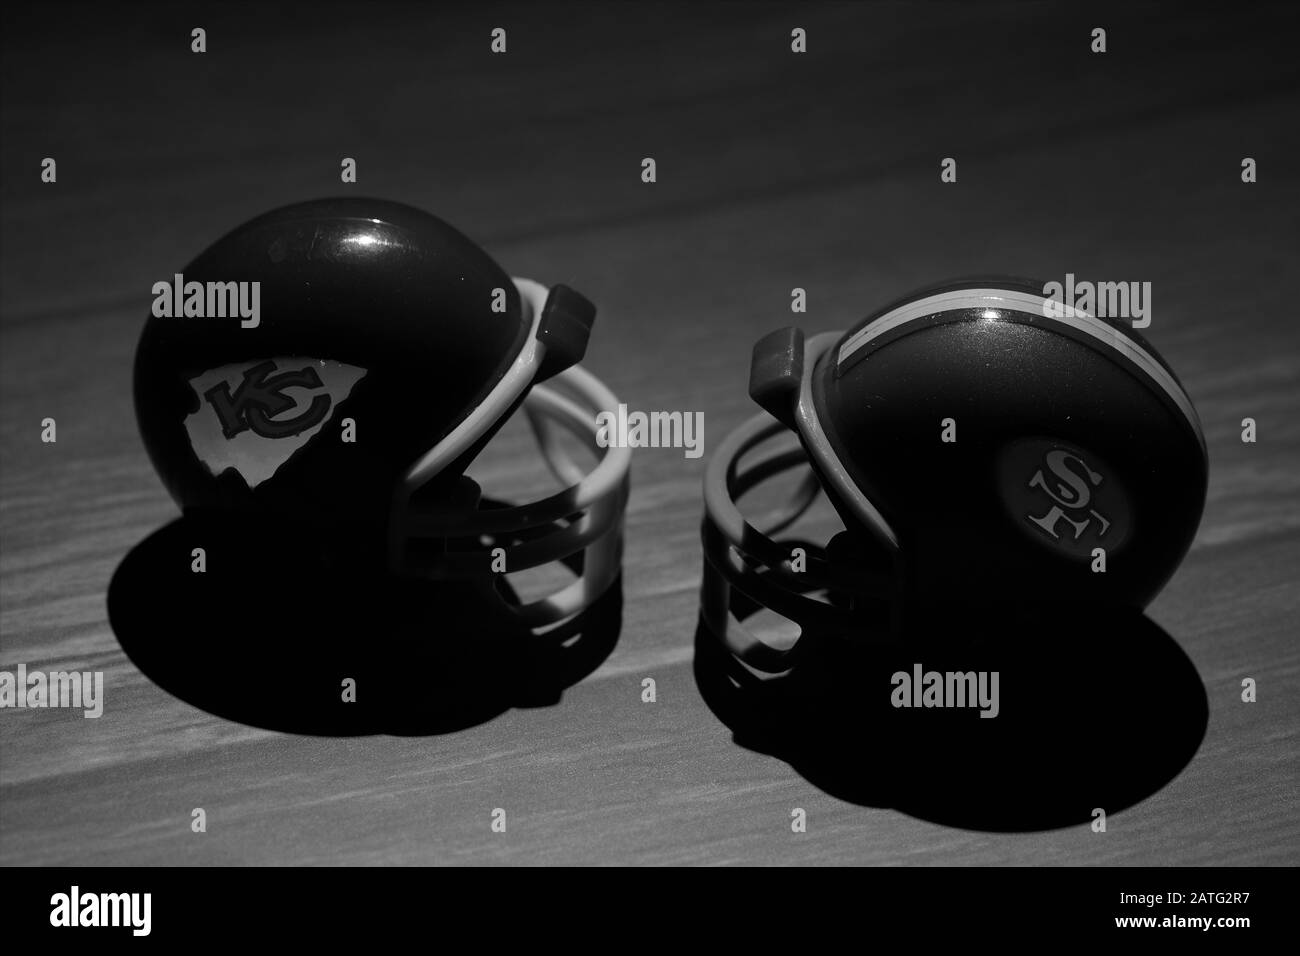 Helmets of the NFL Super Bowl LIV teams, the Kansas City Chiefs and the San Francisco 49ers in black and white on wooden background Stock Photo